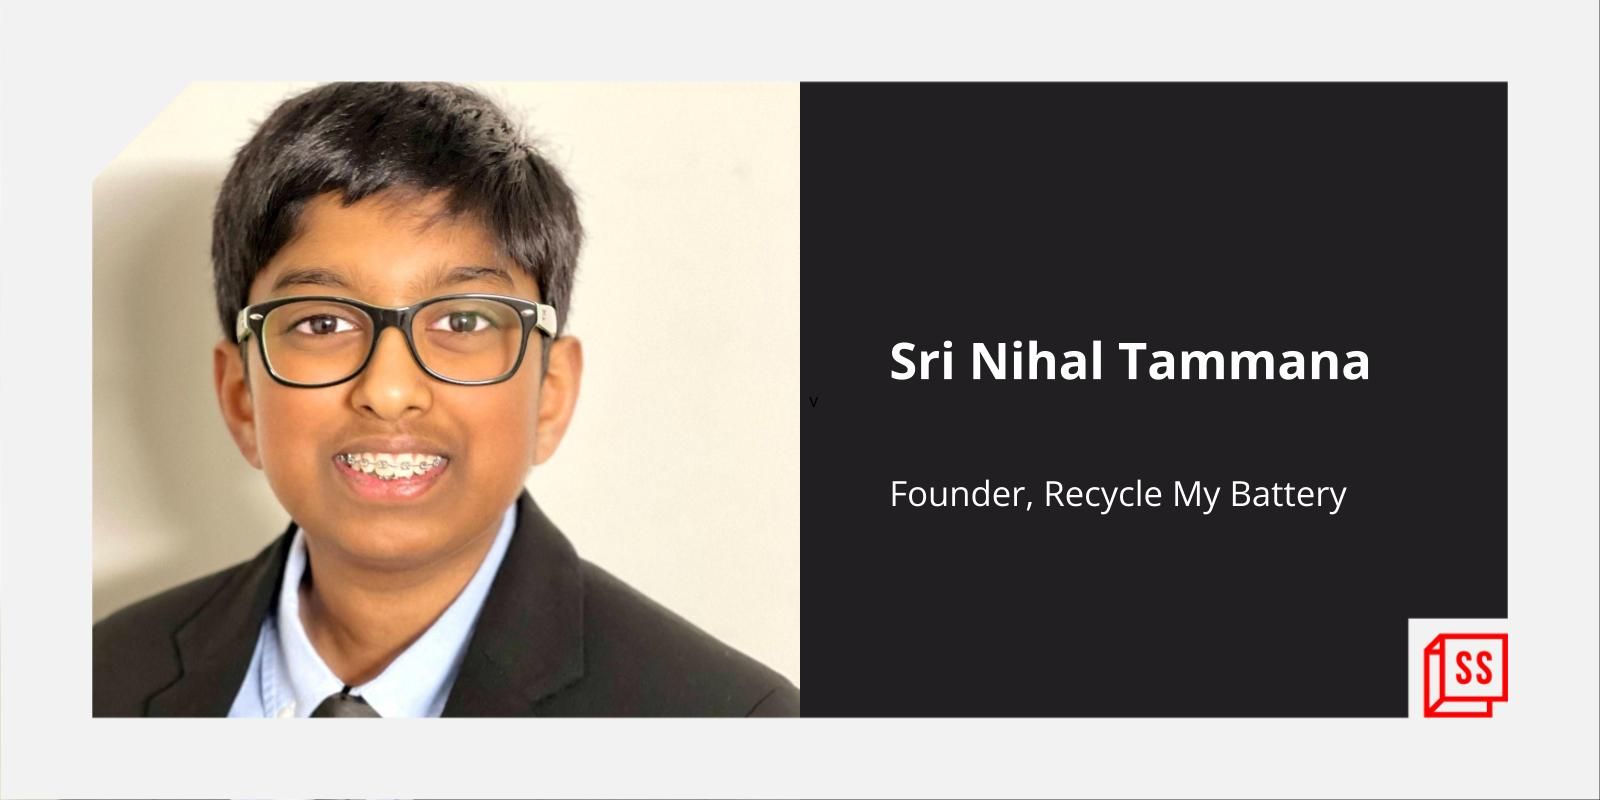 [Sustainability Agenda] This 12-year-old’s NGO has recycled over 1.5 lakh batteries to make Earth a better place